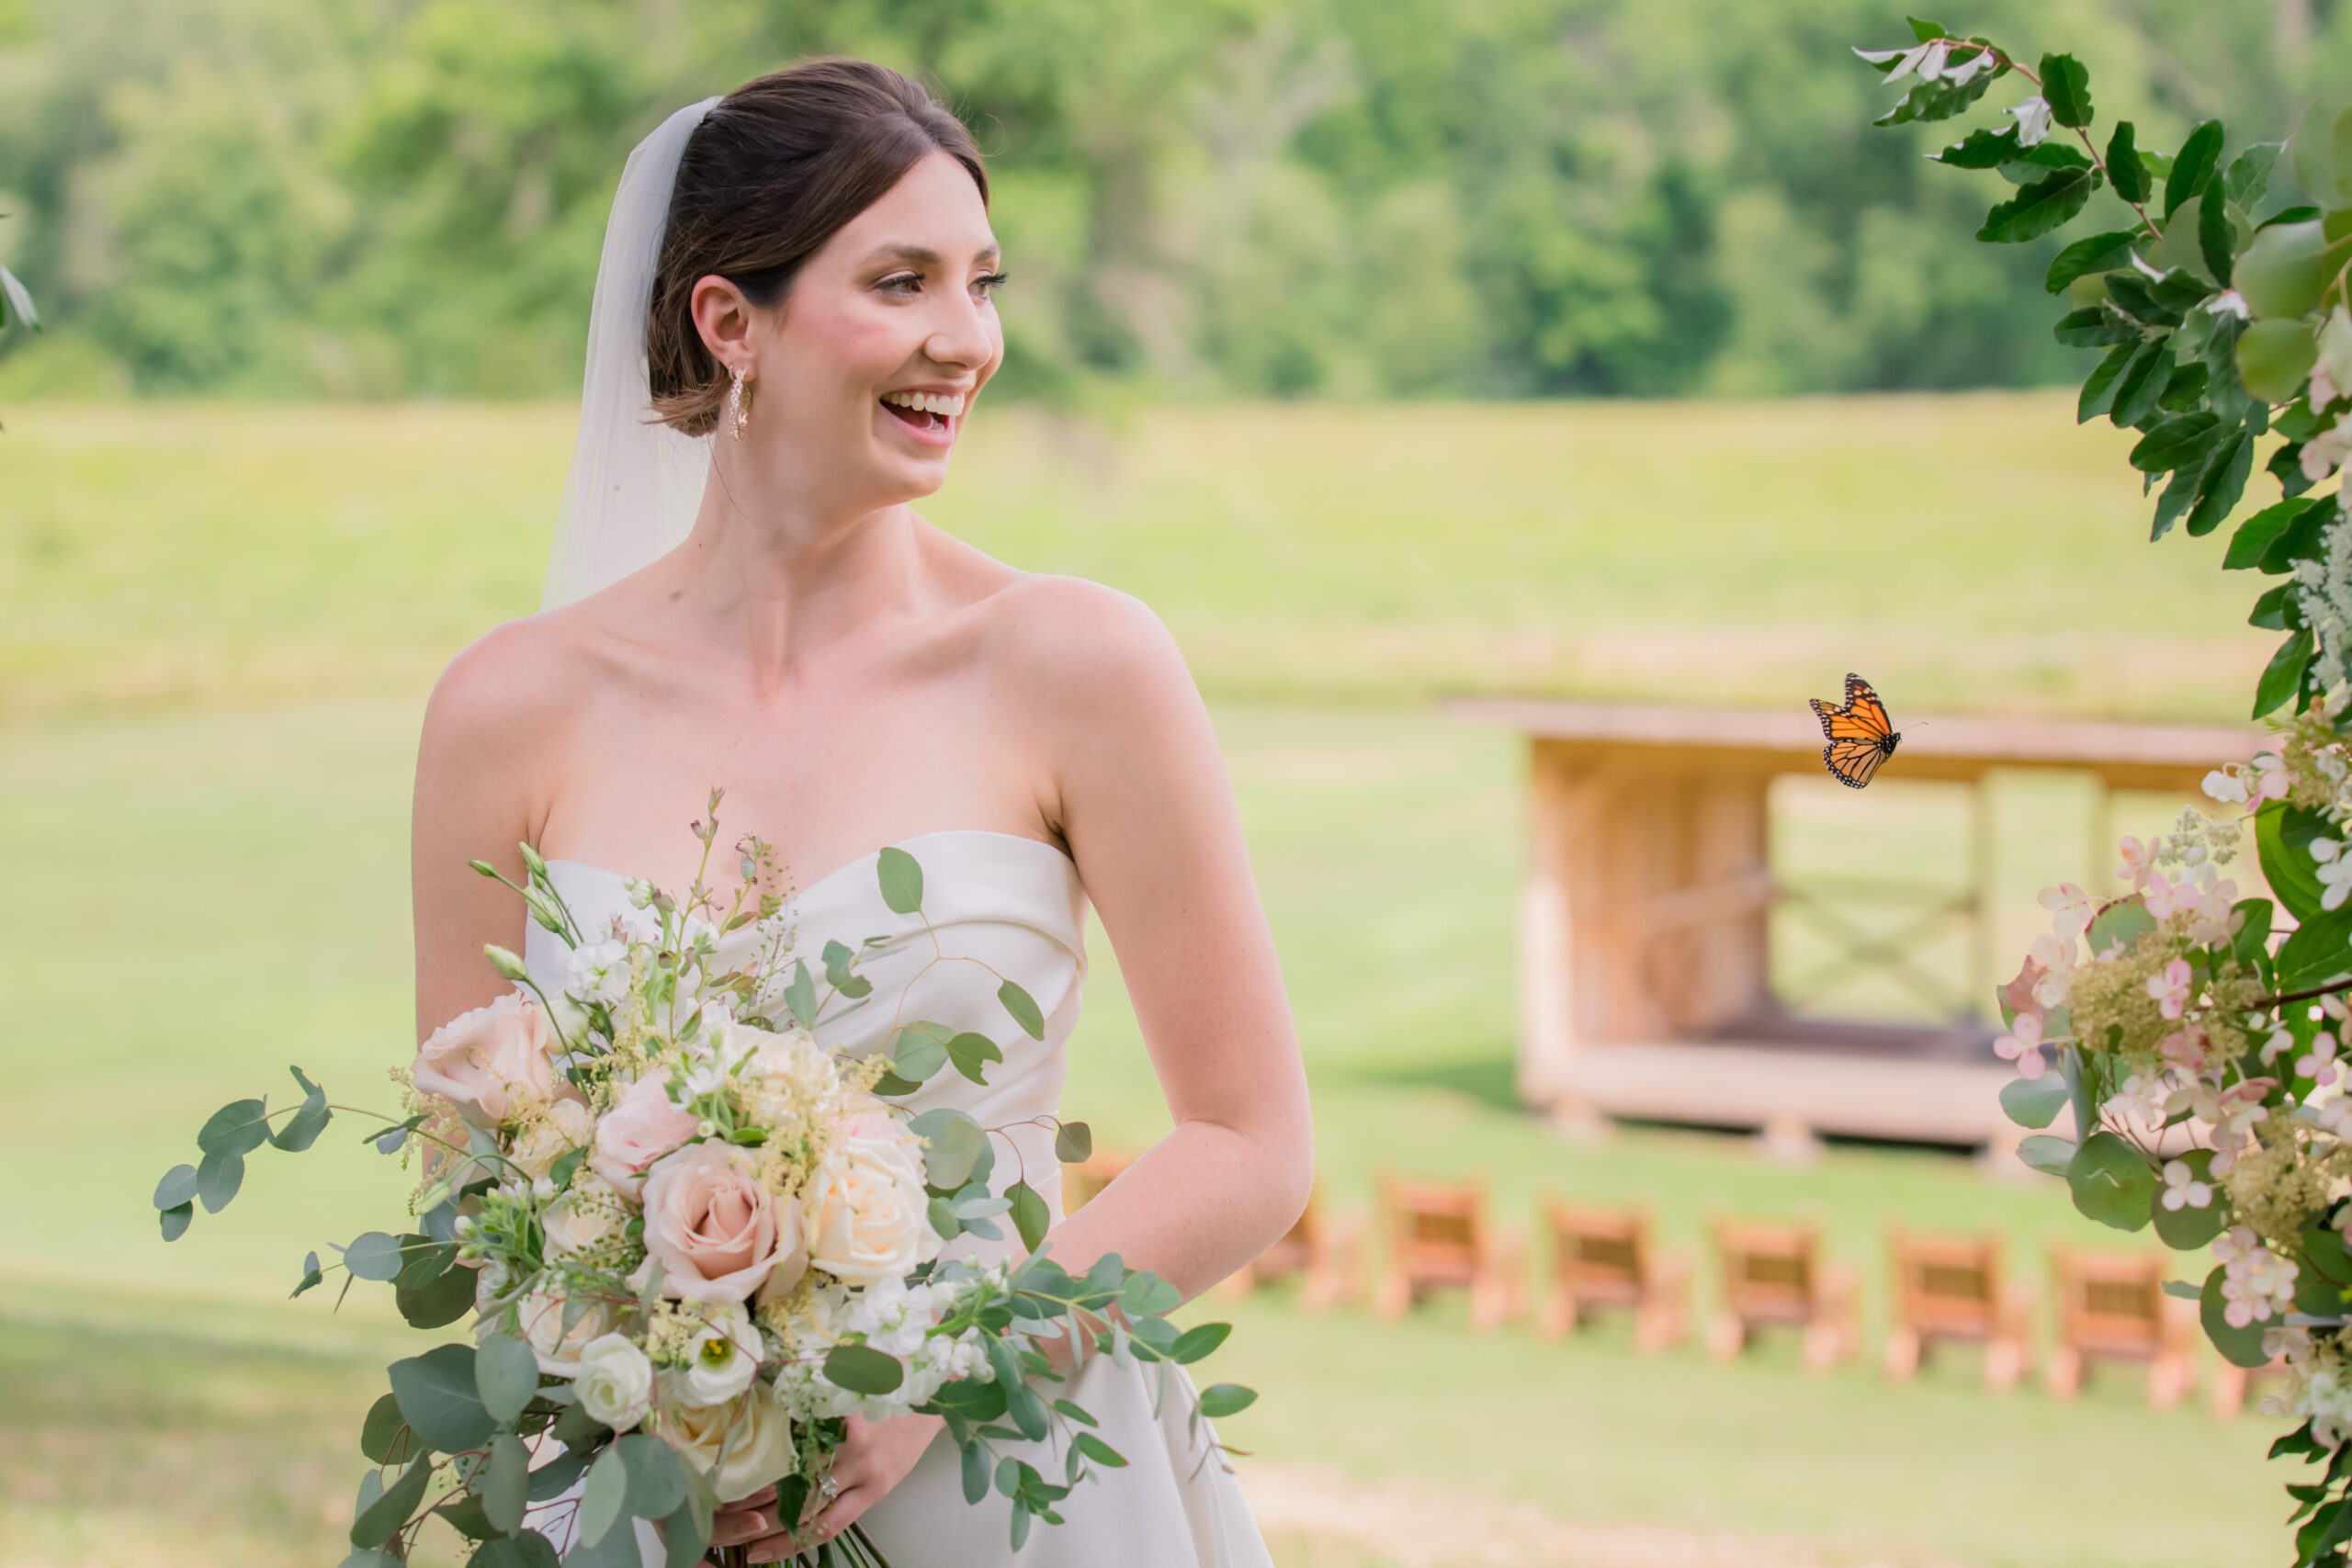 butterfly flying past bride holding bouquet